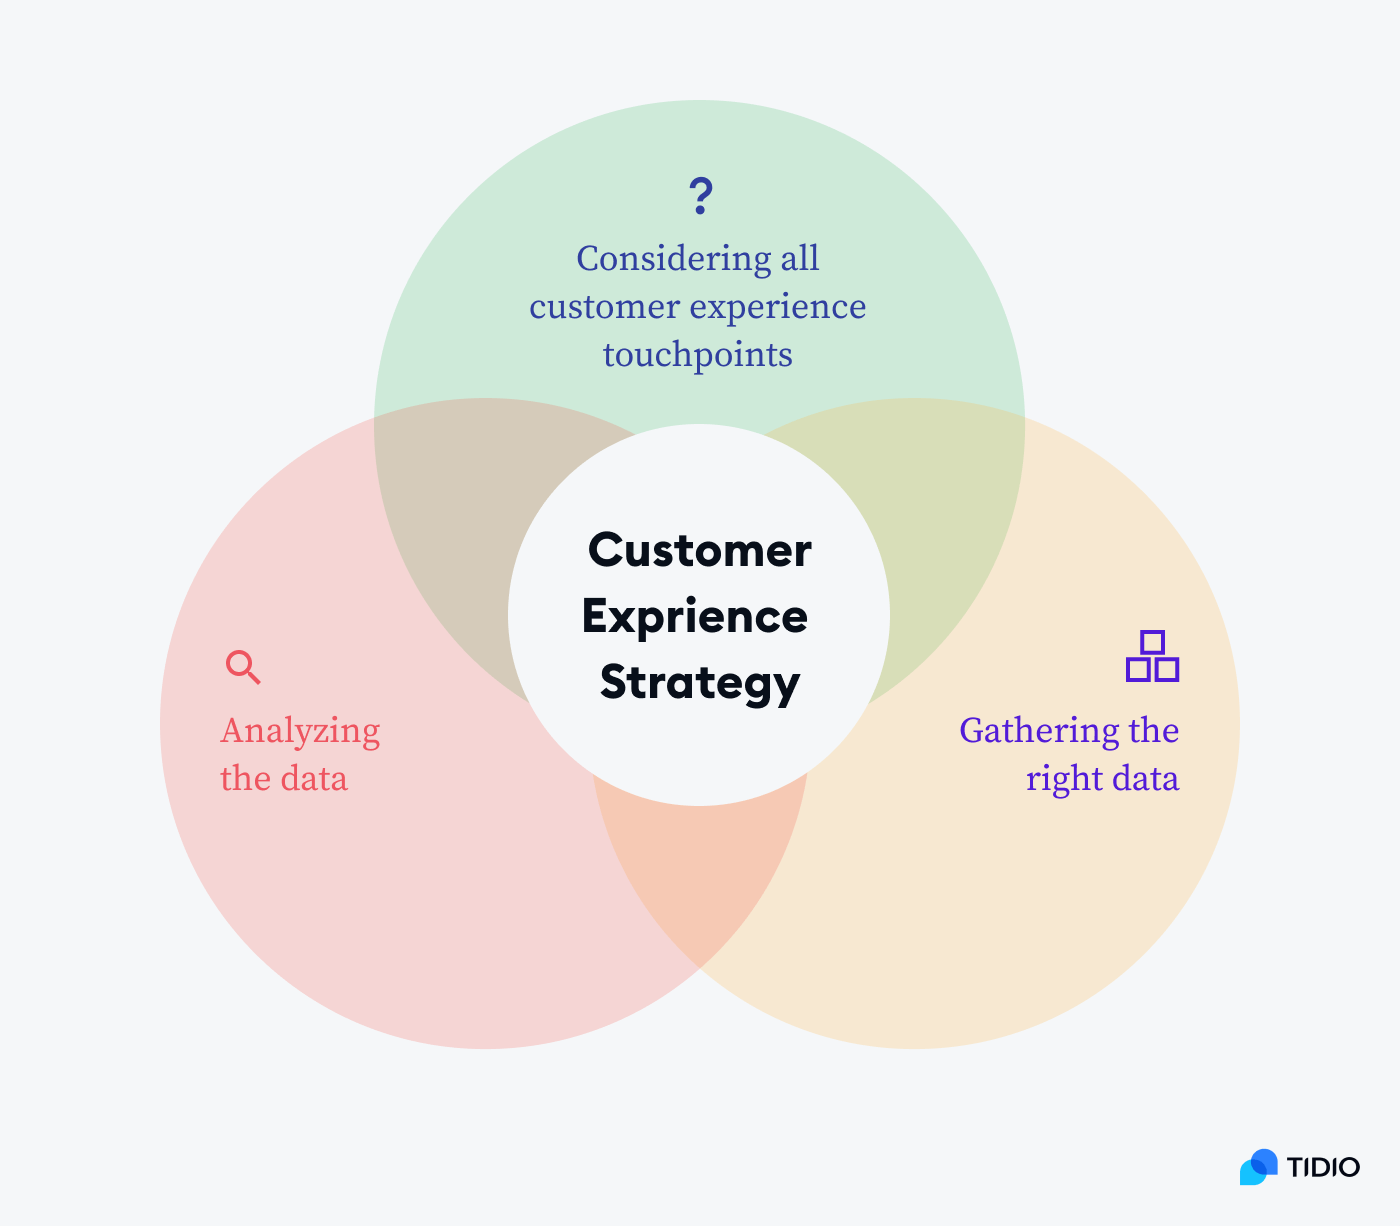 5 Strategies That Help Define a Seamless Customer Experience